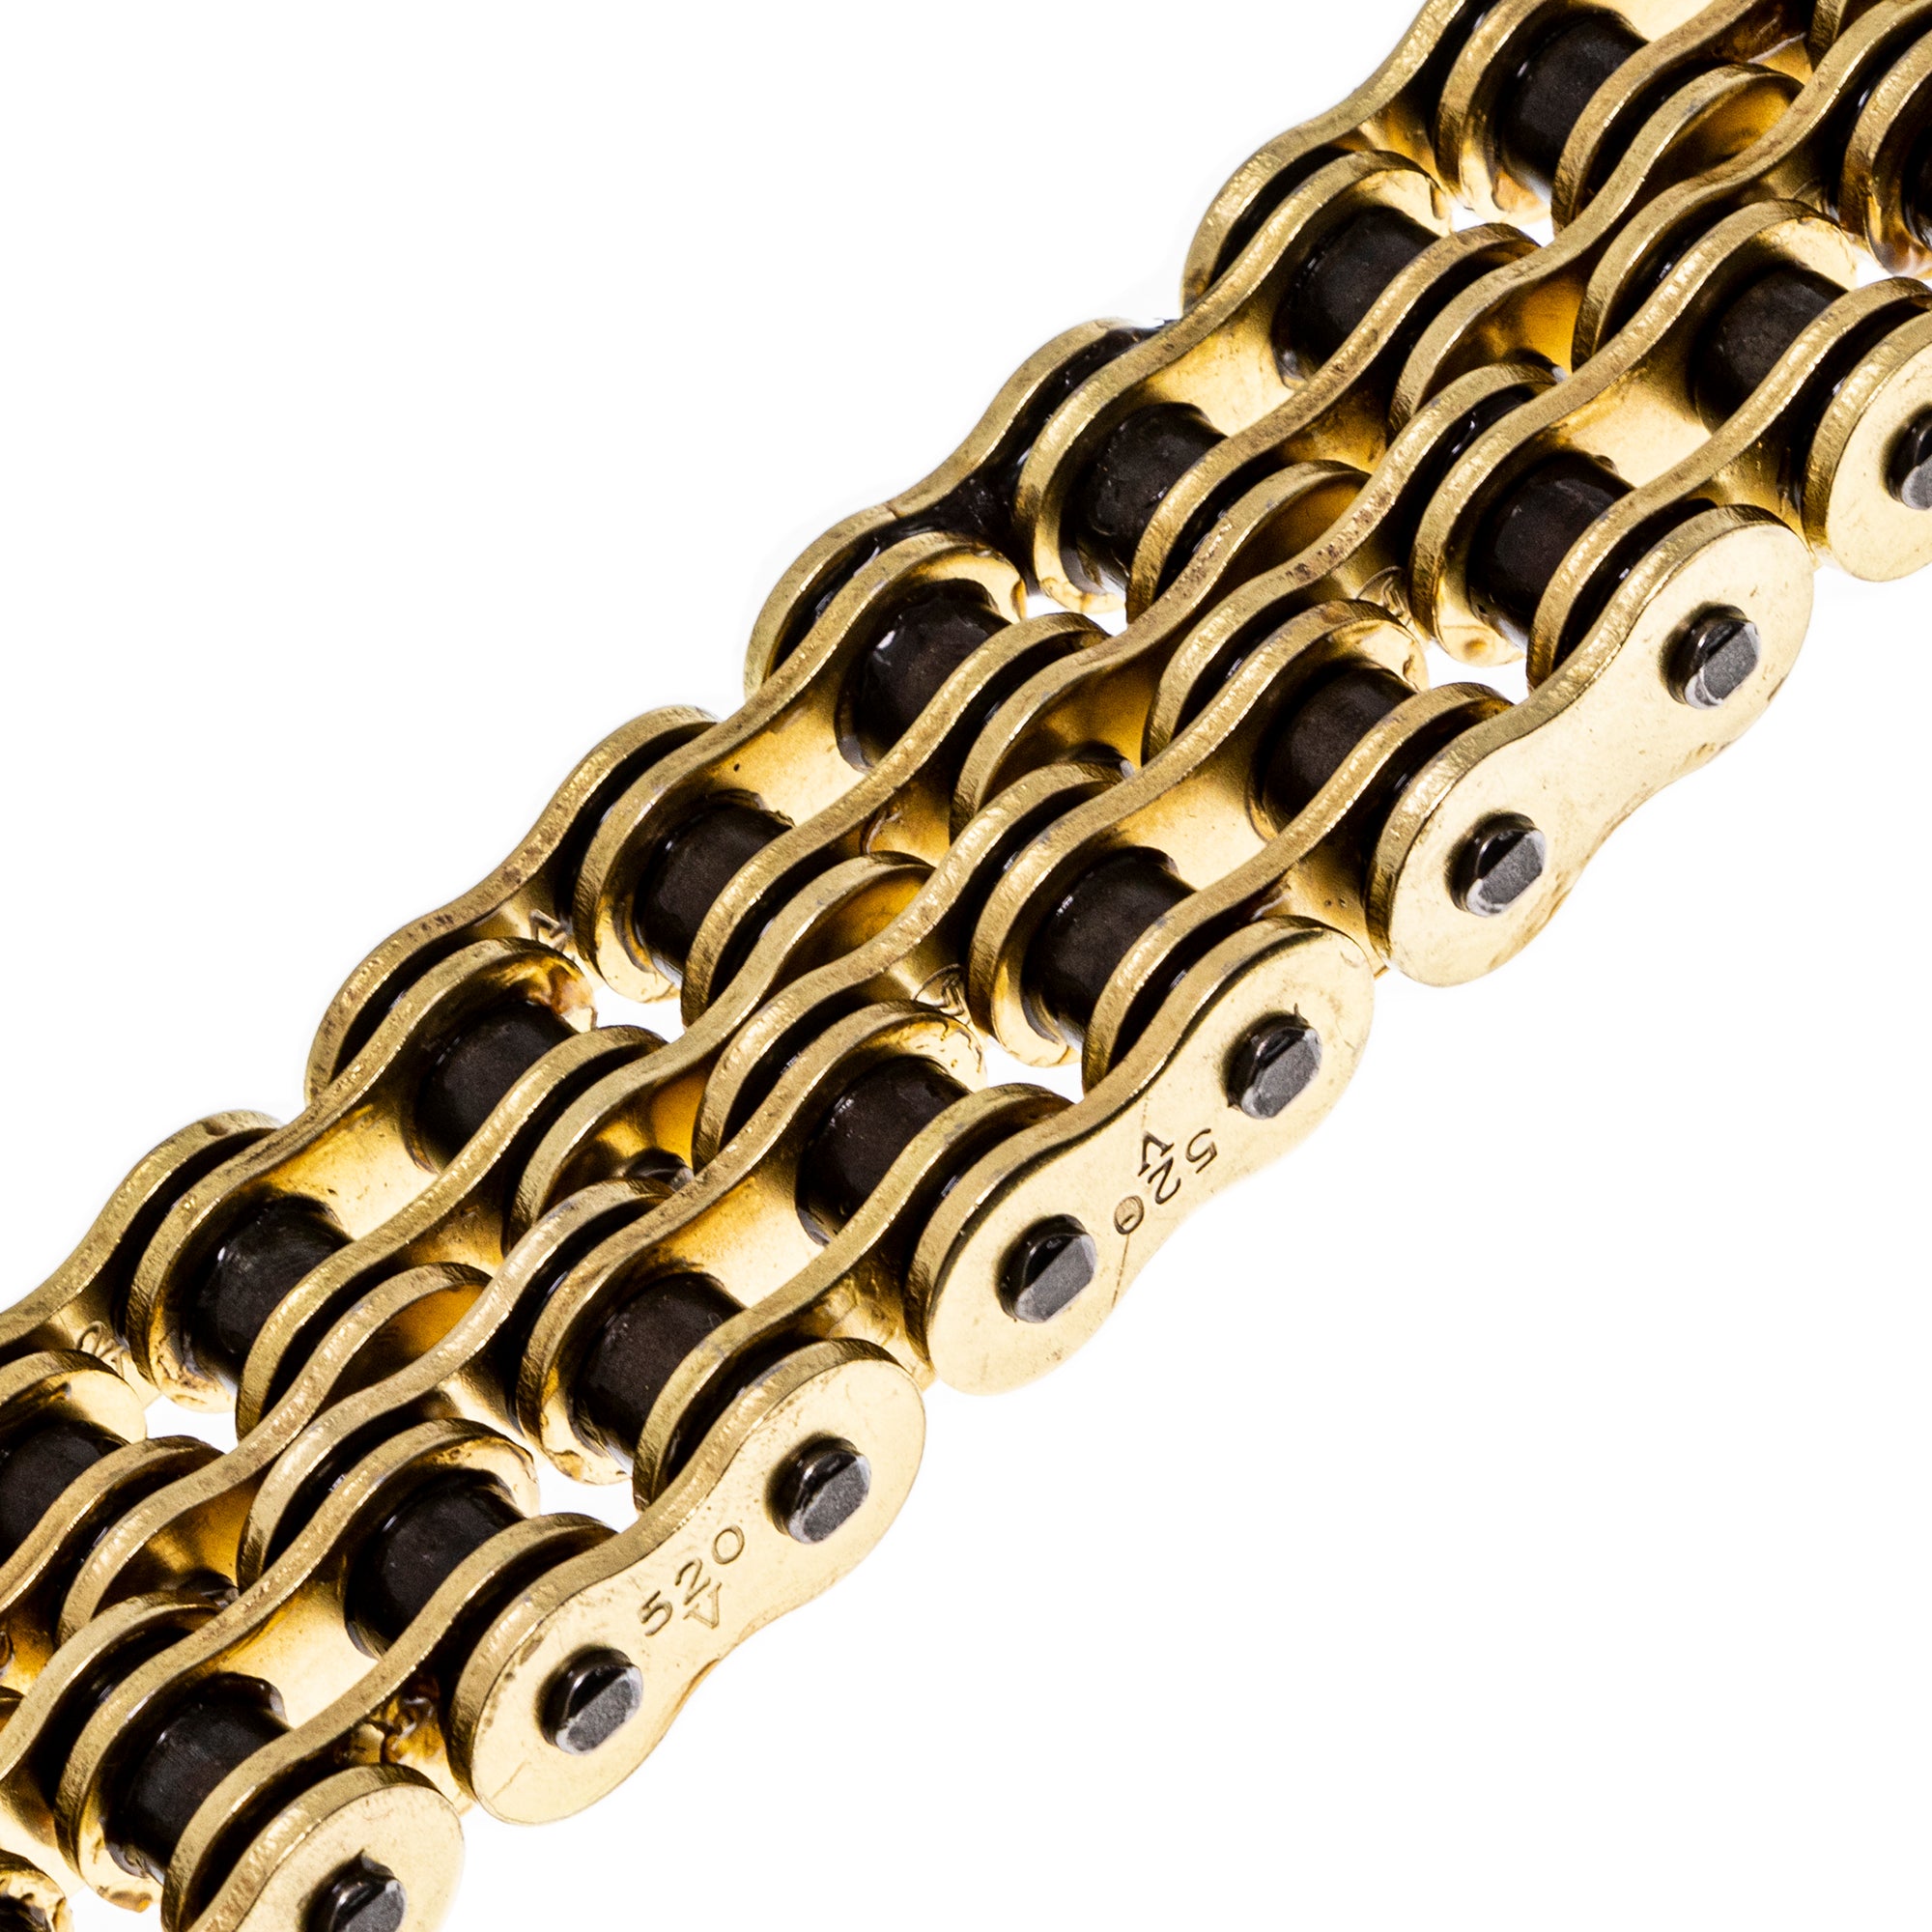 Gold X-Ring Chain 90 w/ Master Link for zOTHER Polaris Kawasaki Tecate Outlaw Mojave NICHE 519-CDC2546H